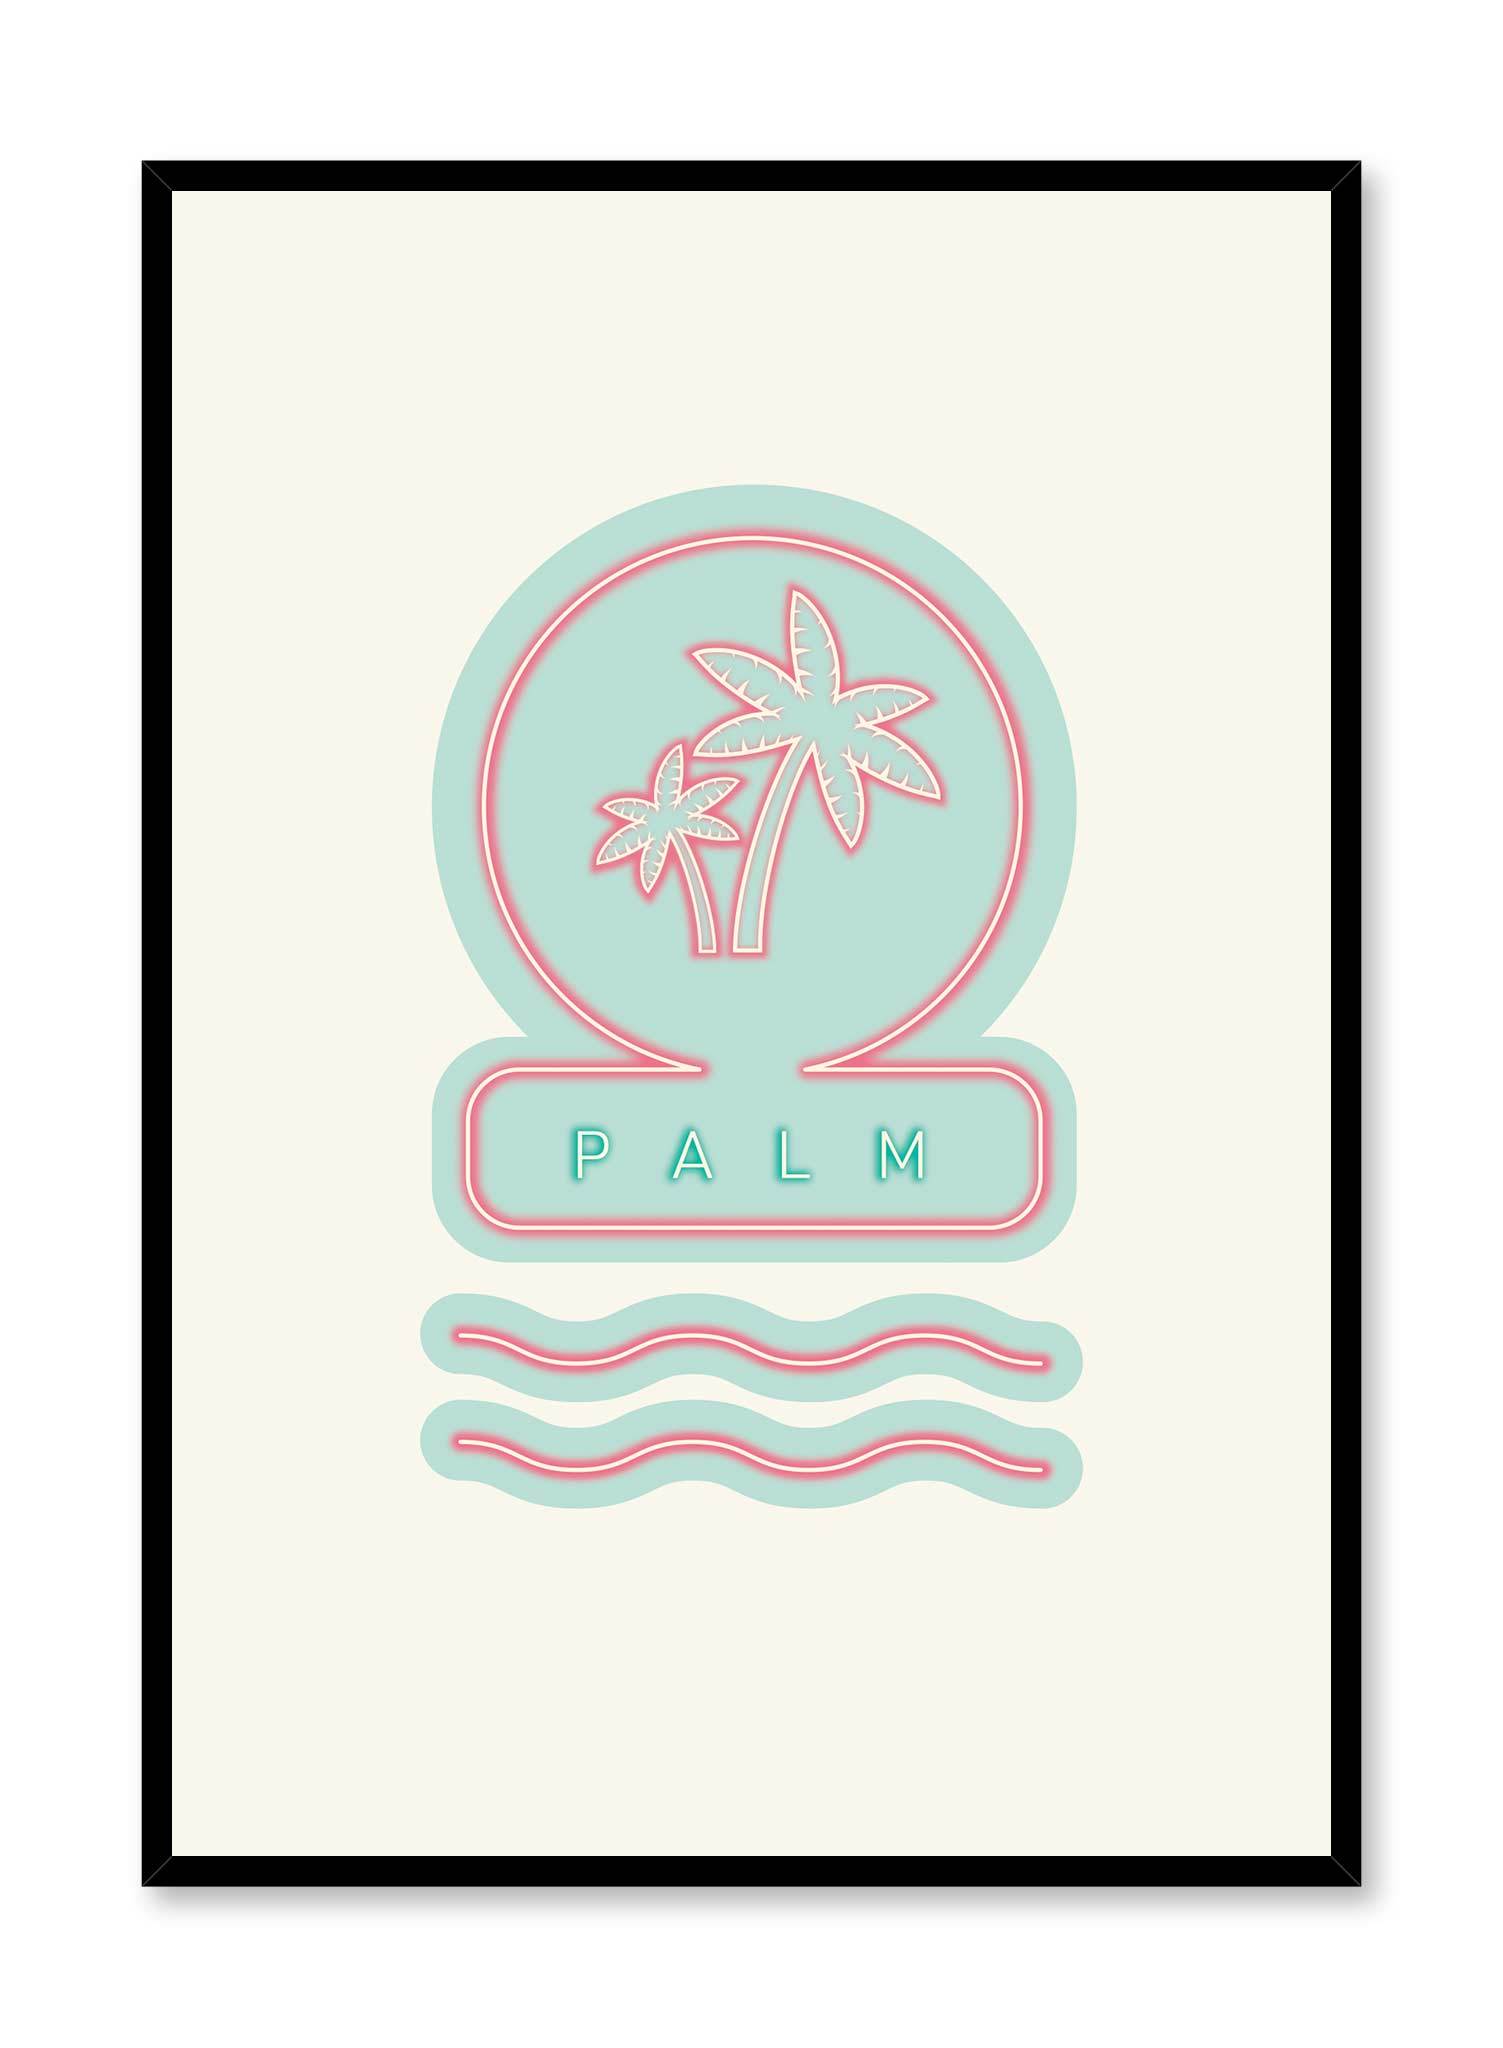 Neon Palms is a minimalist illustration poster of an aqua blue sign by Opposite Wall.